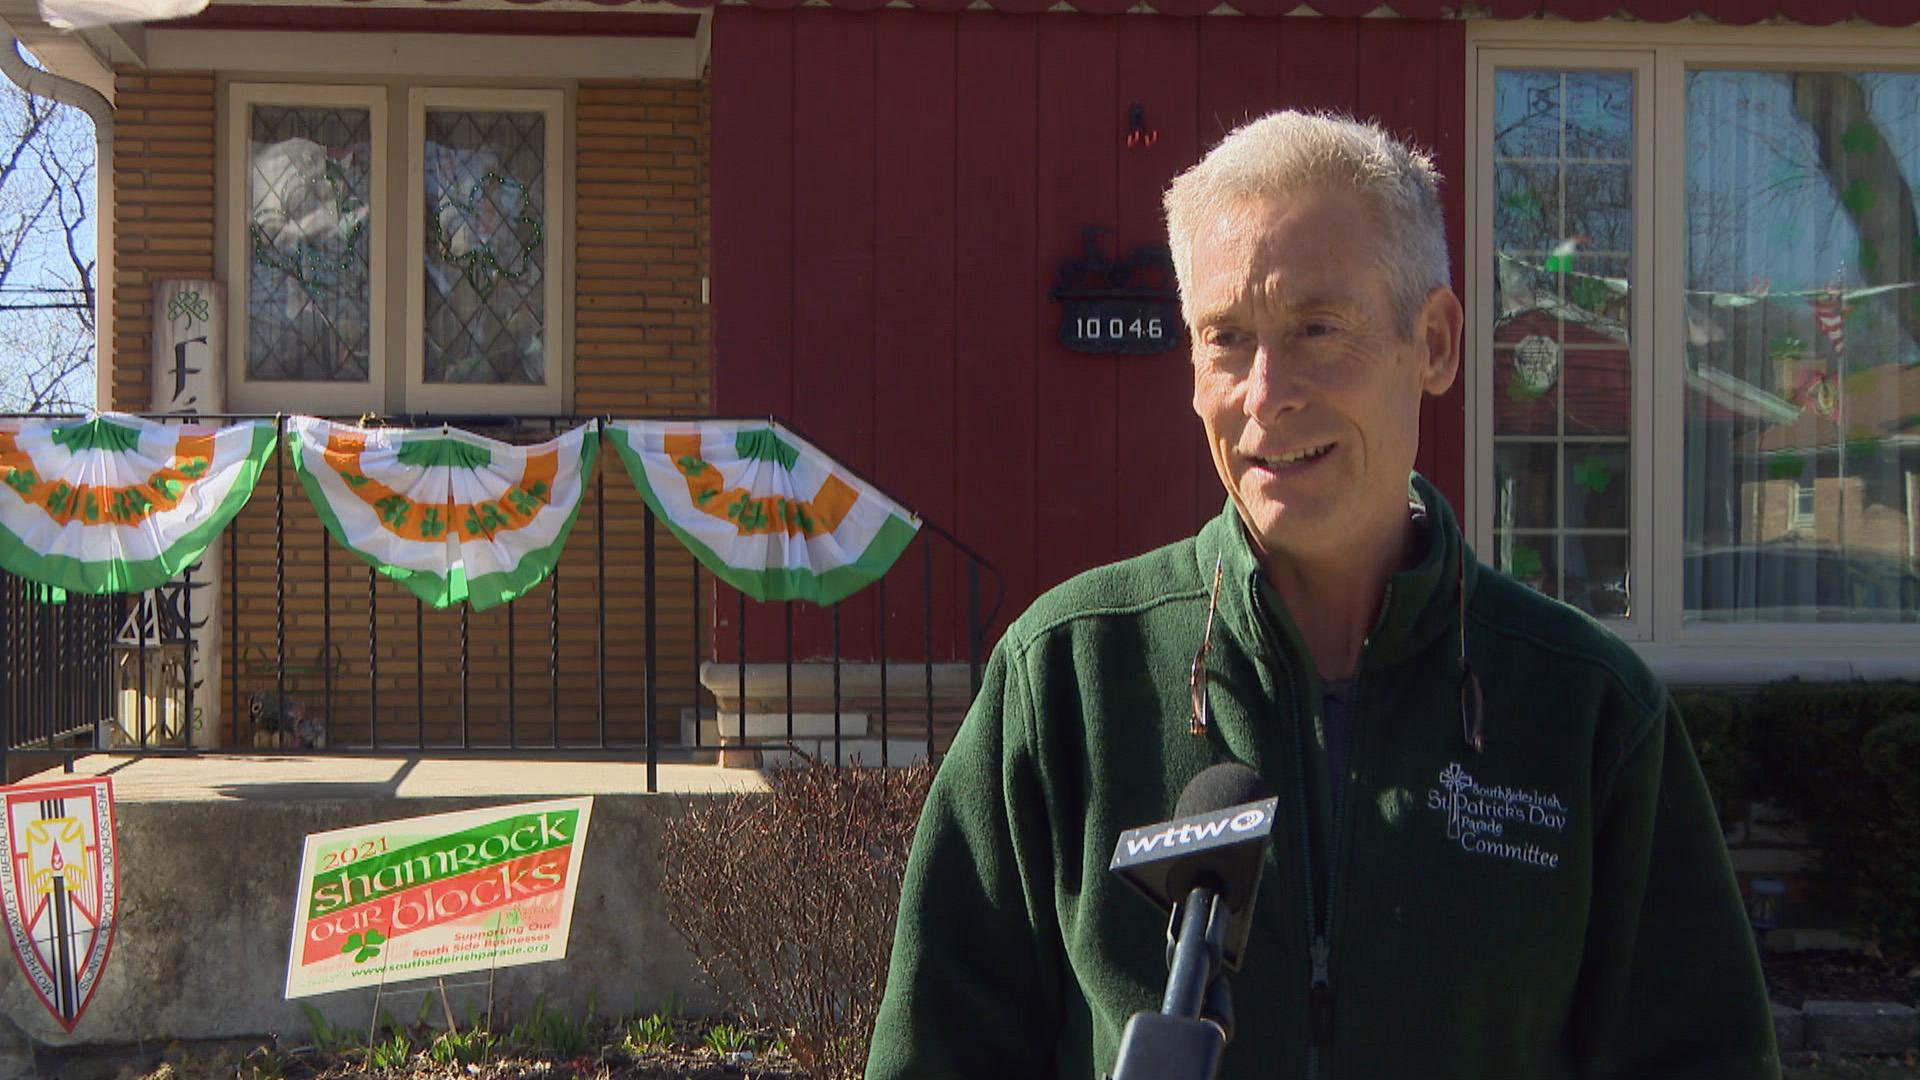 Tim McSweeney, co-chair of the South Side Irish Parade committee. (WTTW News)